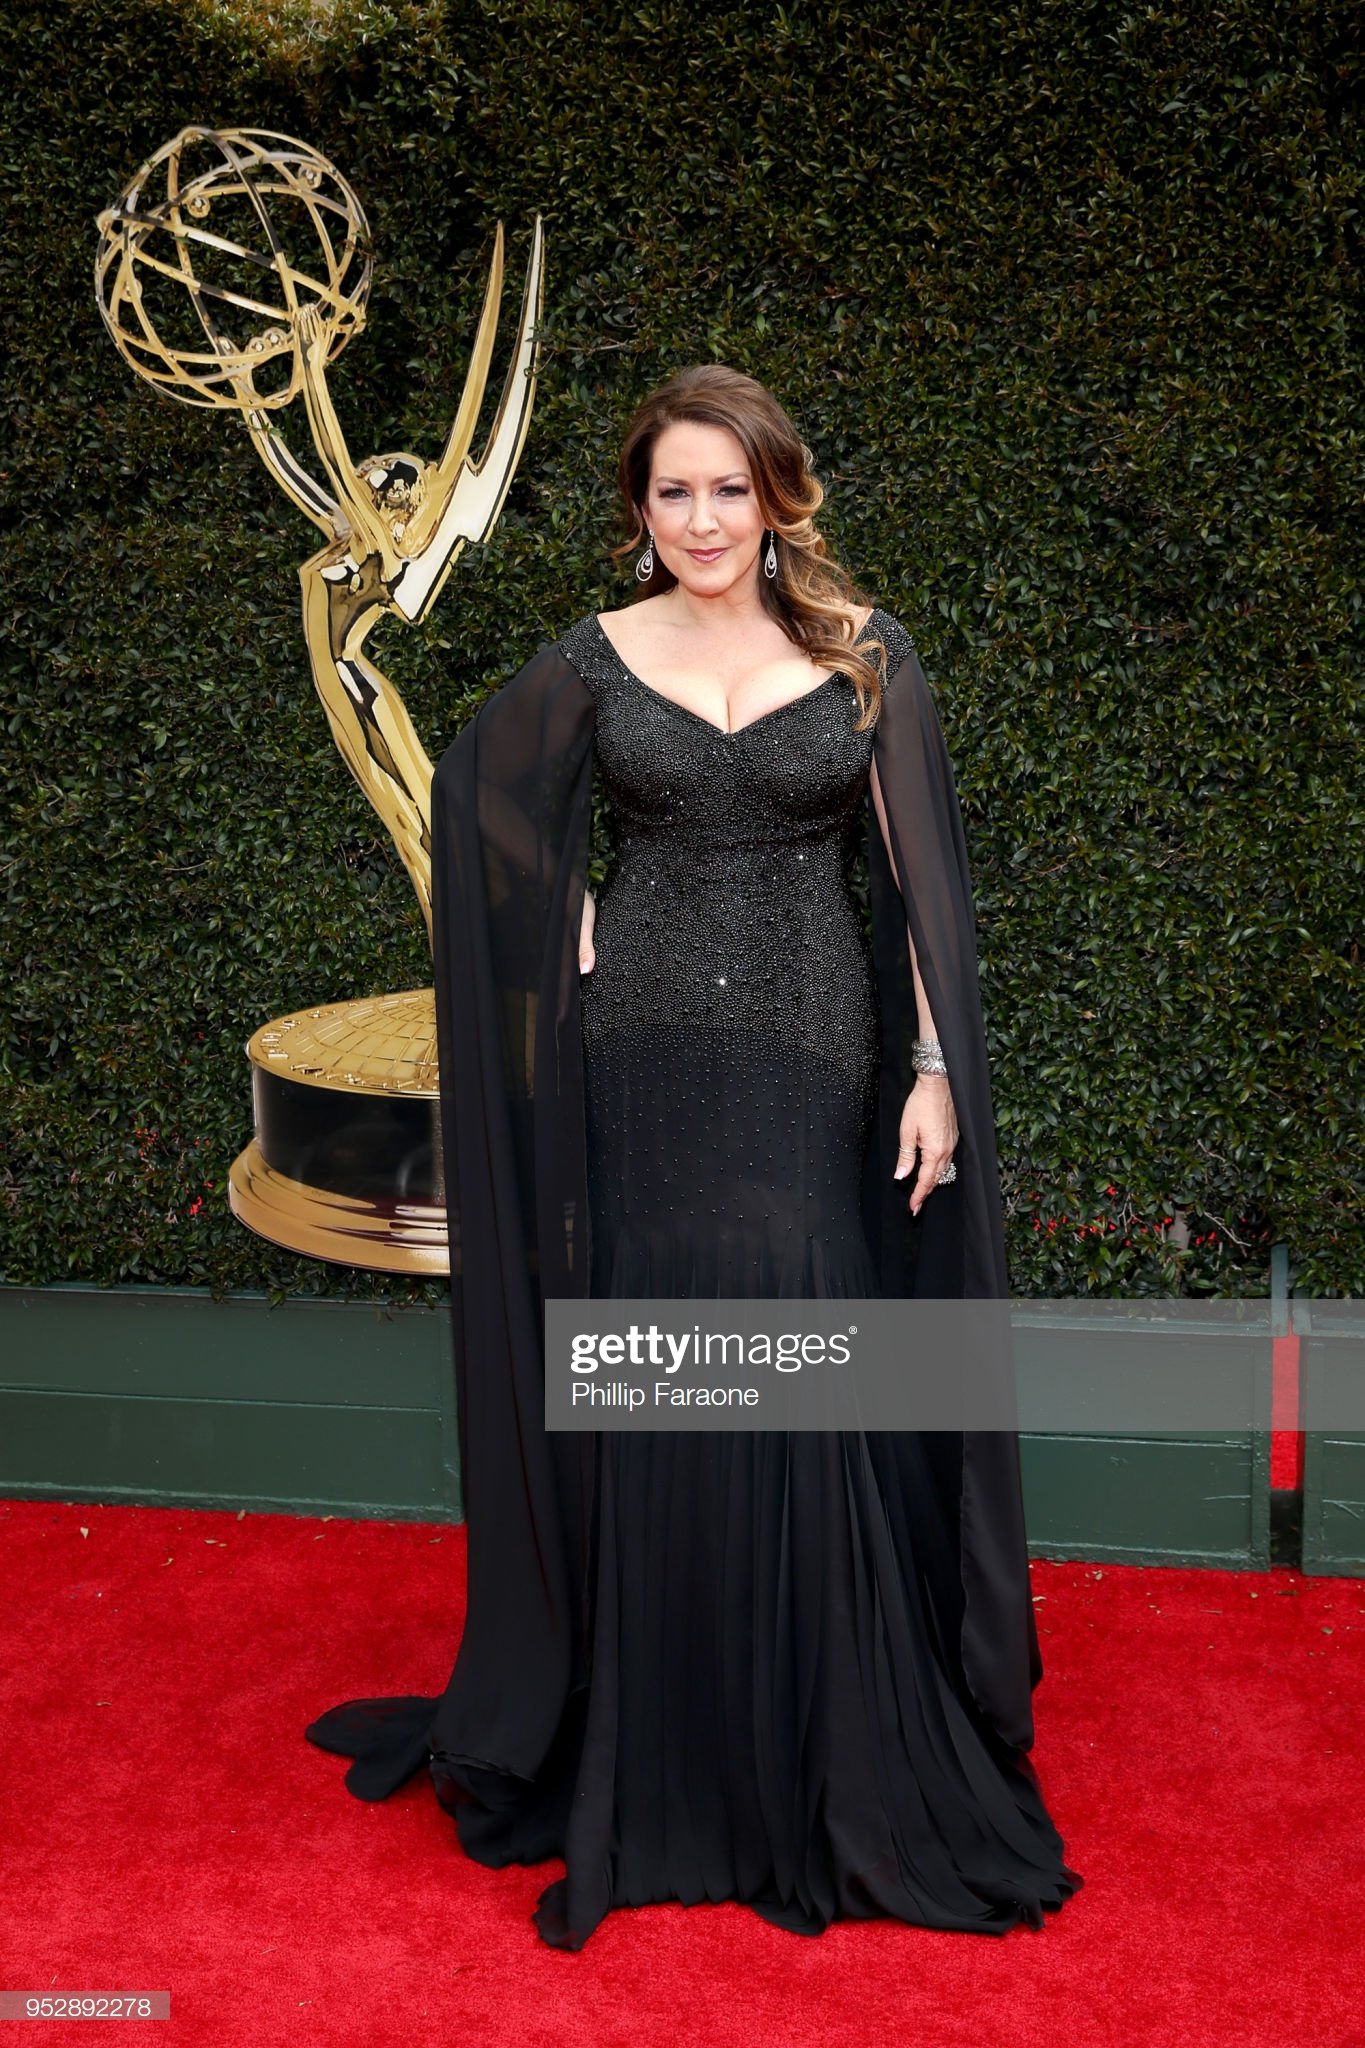  PASADENA, CA - APRIL 29:  Joely Fisher attends the 45th annual Daytime Emmy Awards at Pasadena Civic Auditorium on April 29, 2018 in Pasadena, California.  (Photo by Phillip Faraone/WireImage) 